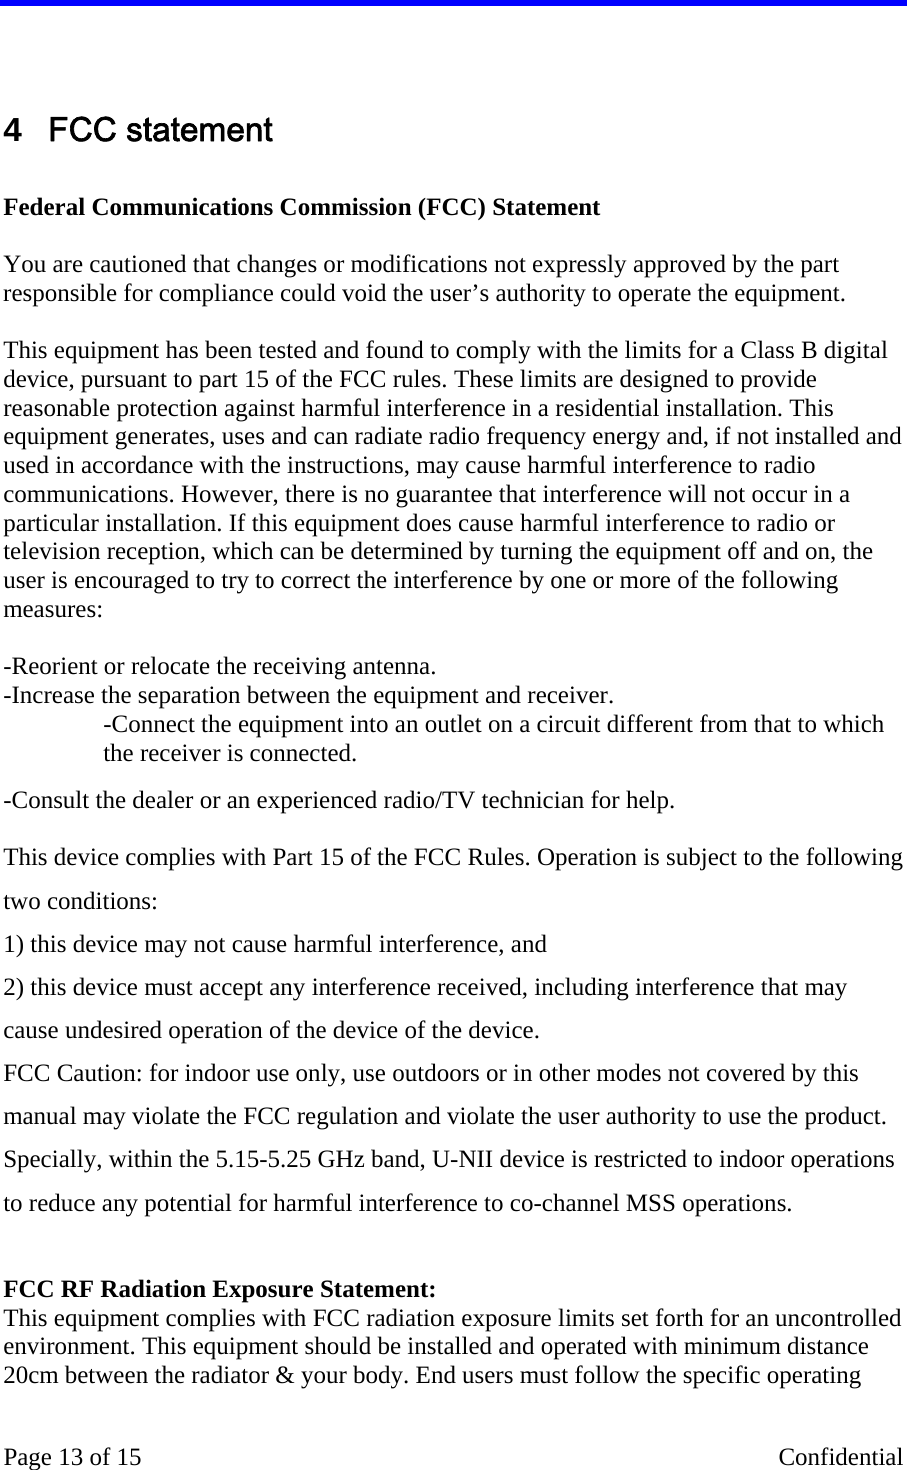    Page 13 of 15    Confidential  4  FCC statement  Federal Communications Commission (FCC) Statement  You are cautioned that changes or modifications not expressly approved by the part responsible for compliance could void the user’s authority to operate the equipment.  This equipment has been tested and found to comply with the limits for a Class B digital device, pursuant to part 15 of the FCC rules. These limits are designed to provide reasonable protection against harmful interference in a residential installation. This equipment generates, uses and can radiate radio frequency energy and, if not installed and used in accordance with the instructions, may cause harmful interference to radio communications. However, there is no guarantee that interference will not occur in a particular installation. If this equipment does cause harmful interference to radio or television reception, which can be determined by turning the equipment off and on, the user is encouraged to try to correct the interference by one or more of the following measures:   -Reorient or relocate the receiving antenna. -Increase the separation between the equipment and receiver. -Connect the equipment into an outlet on a circuit different from that to which the receiver is connected. -Consult the dealer or an experienced radio/TV technician for help.  This device complies with Part 15 of the FCC Rules. Operation is subject to the following two conditions: 1) this device may not cause harmful interference, and 2) this device must accept any interference received, including interference that may cause undesired operation of the device of the device. FCC Caution: for indoor use only, use outdoors or in other modes not covered by this manual may violate the FCC regulation and violate the user authority to use the product. Specially, within the 5.15-5.25 GHz band, U-NII device is restricted to indoor operations to reduce any potential for harmful interference to co-channel MSS operations.  FCC RF Radiation Exposure Statement: This equipment complies with FCC radiation exposure limits set forth for an uncontrolled environment. This equipment should be installed and operated with minimum distance 20cm between the radiator &amp; your body. End users must follow the specific operating 